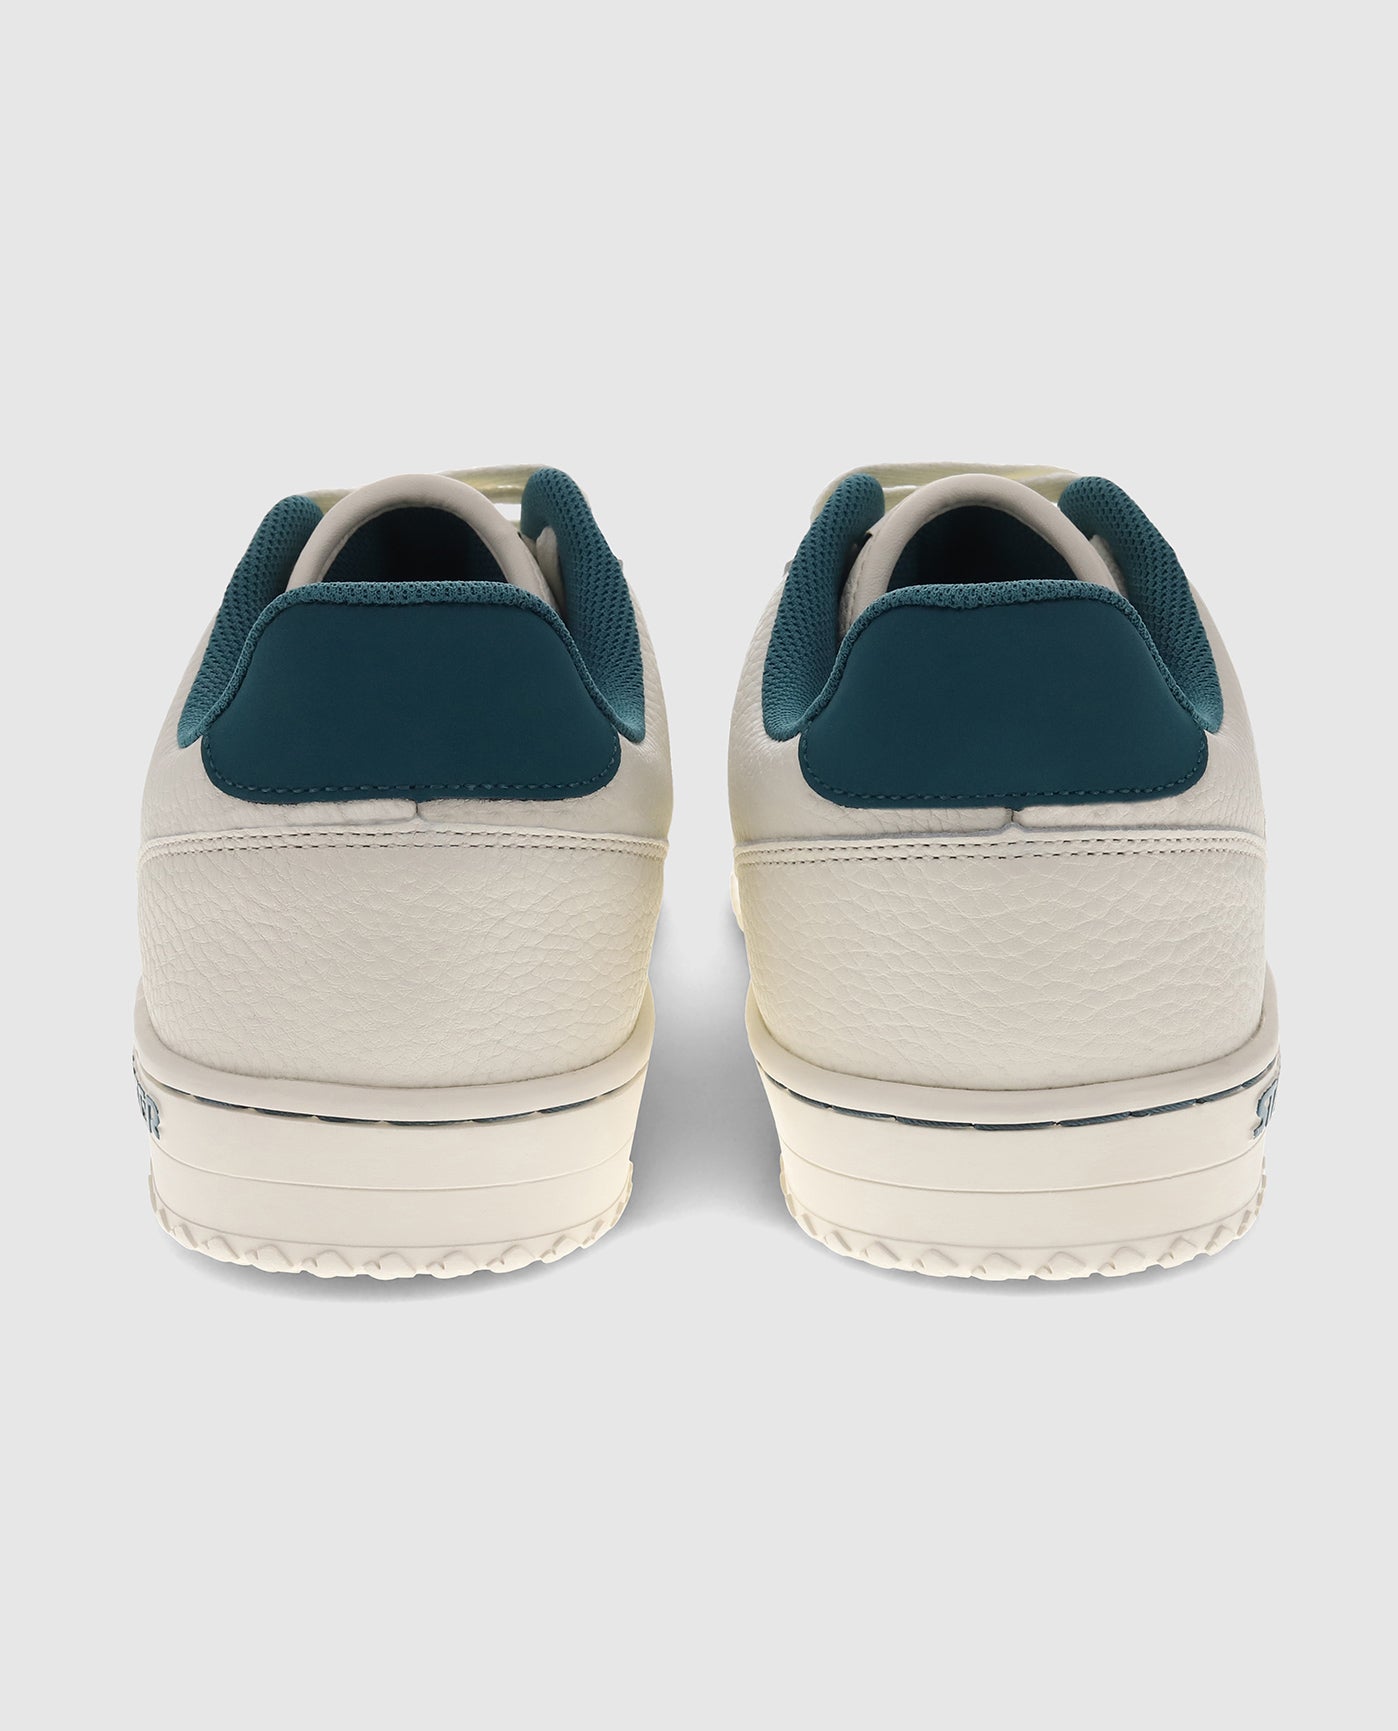 Back of Green and Off White Starter LFS 1 Sneakers | Green Off White